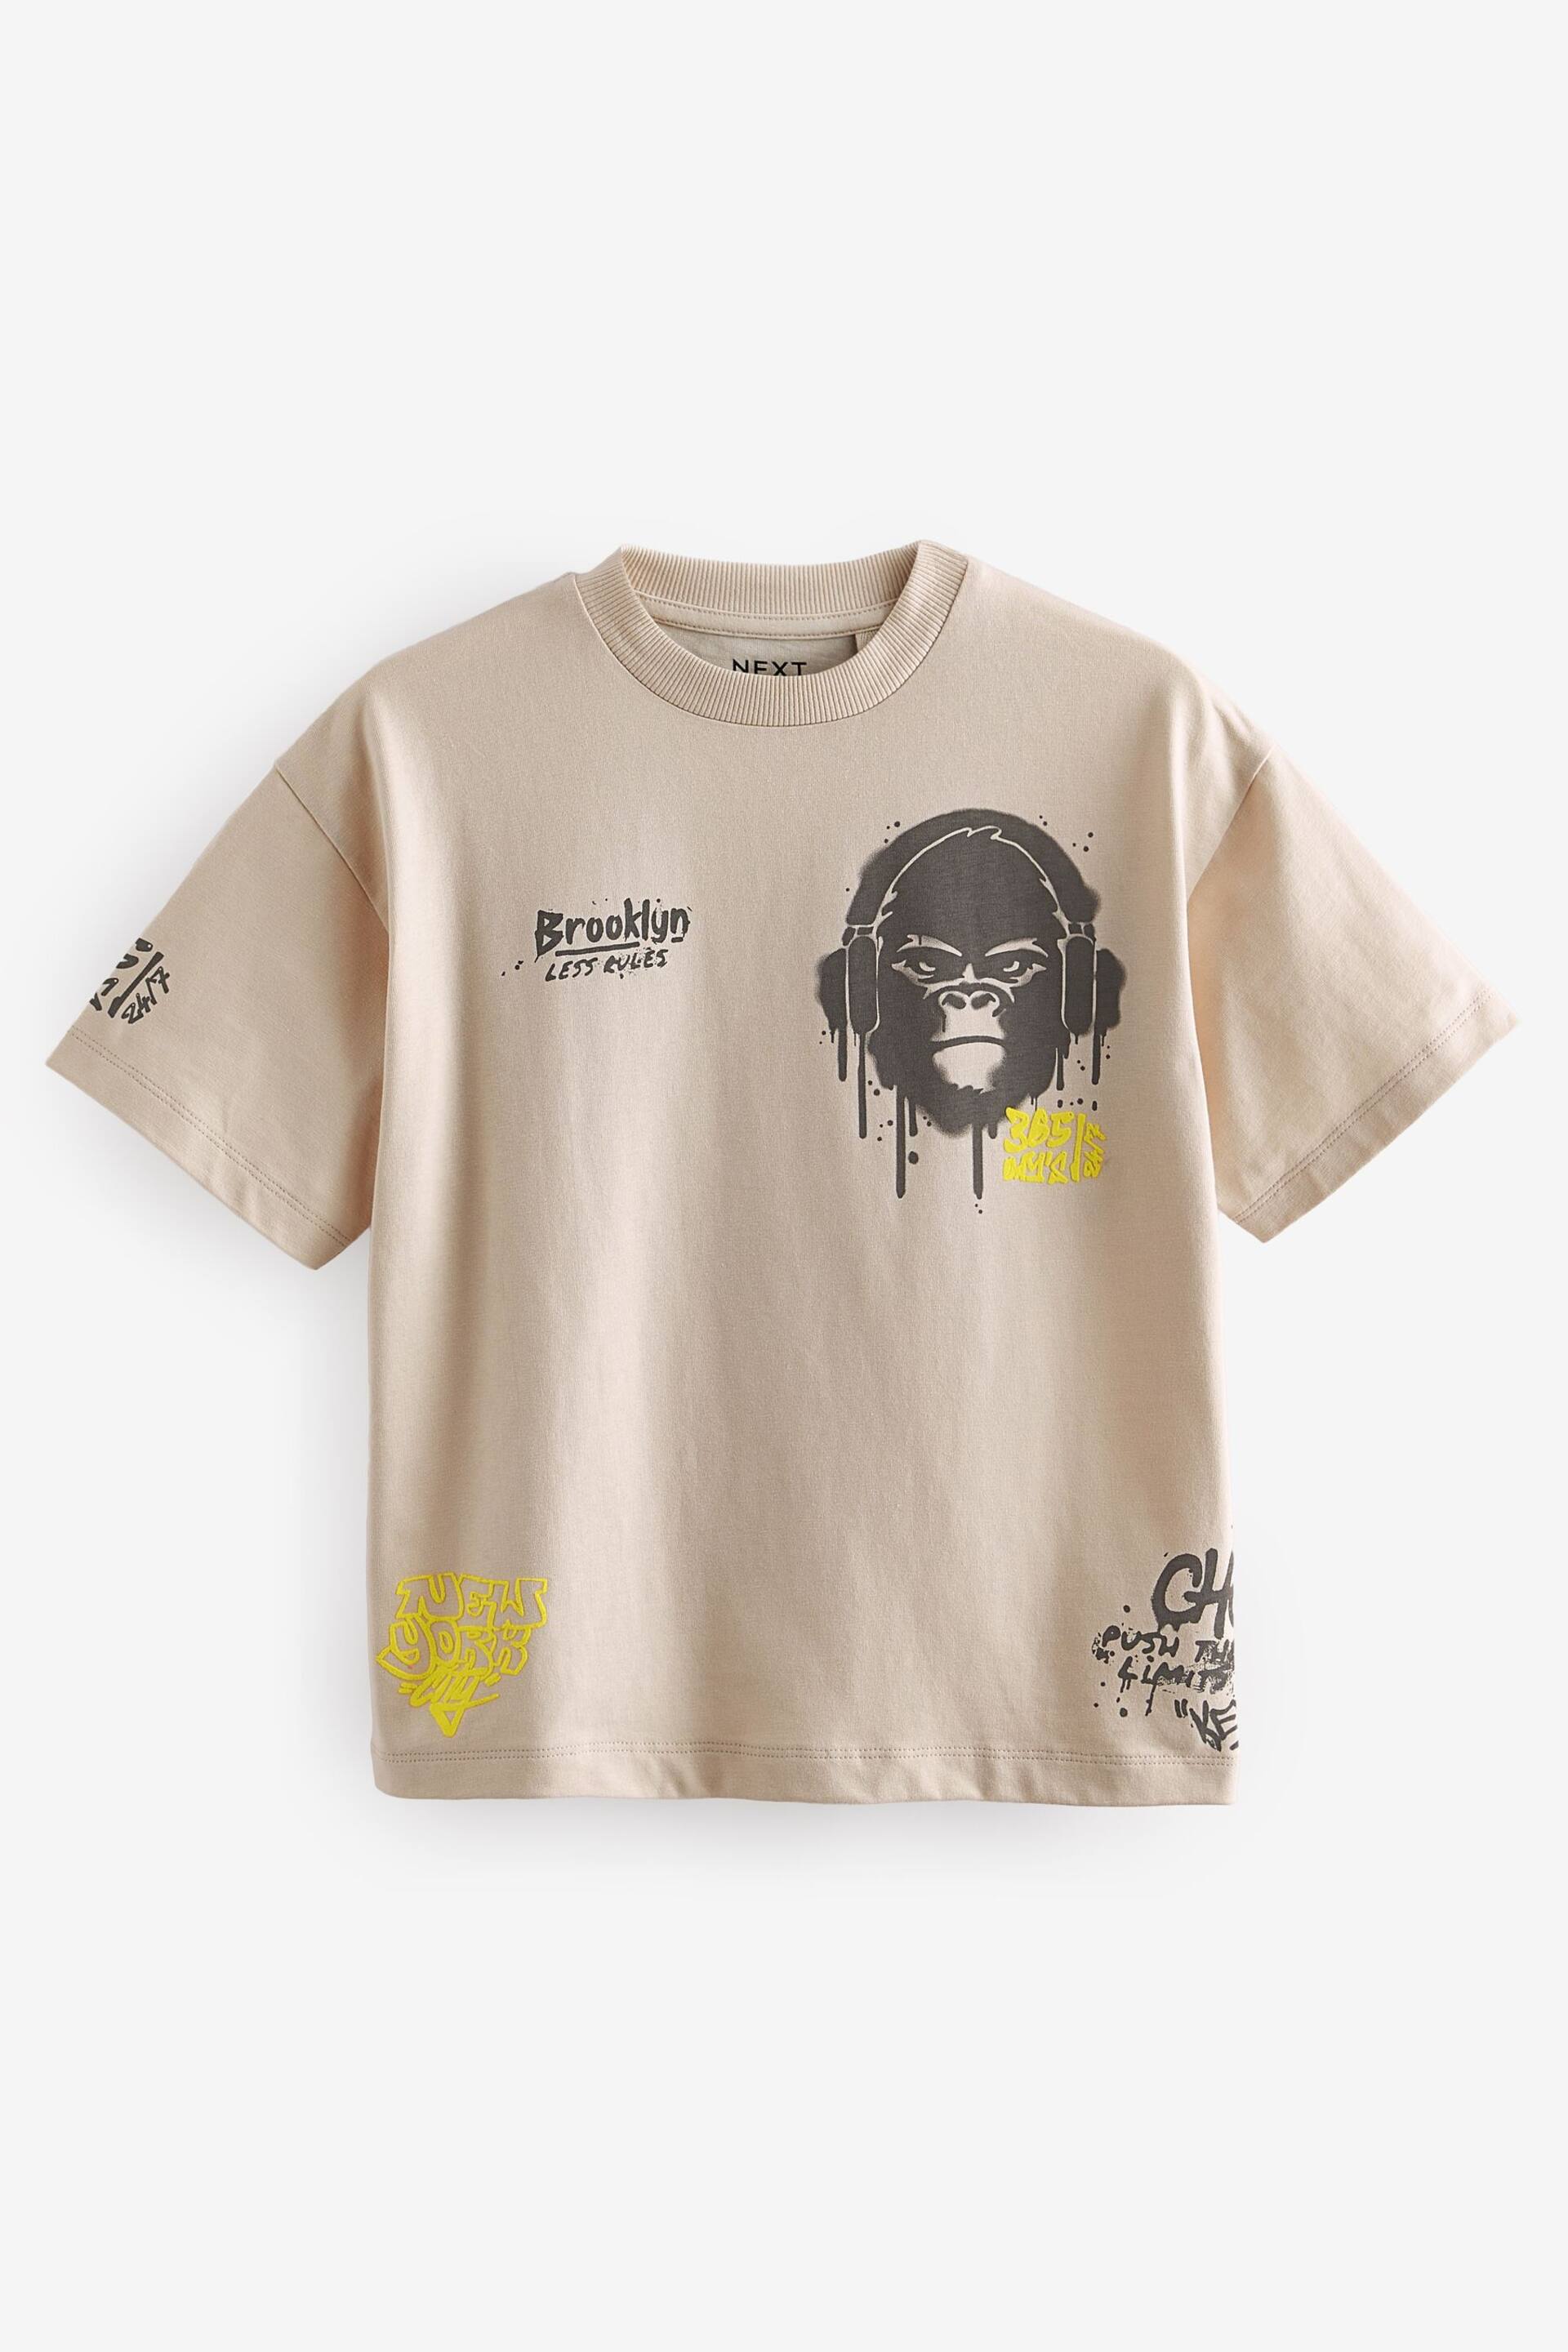 Stone Gorilla Graffiti Relaxed Fit Short Sleeve Graphic T-Shirt (3-16yrs) - Image 1 of 4